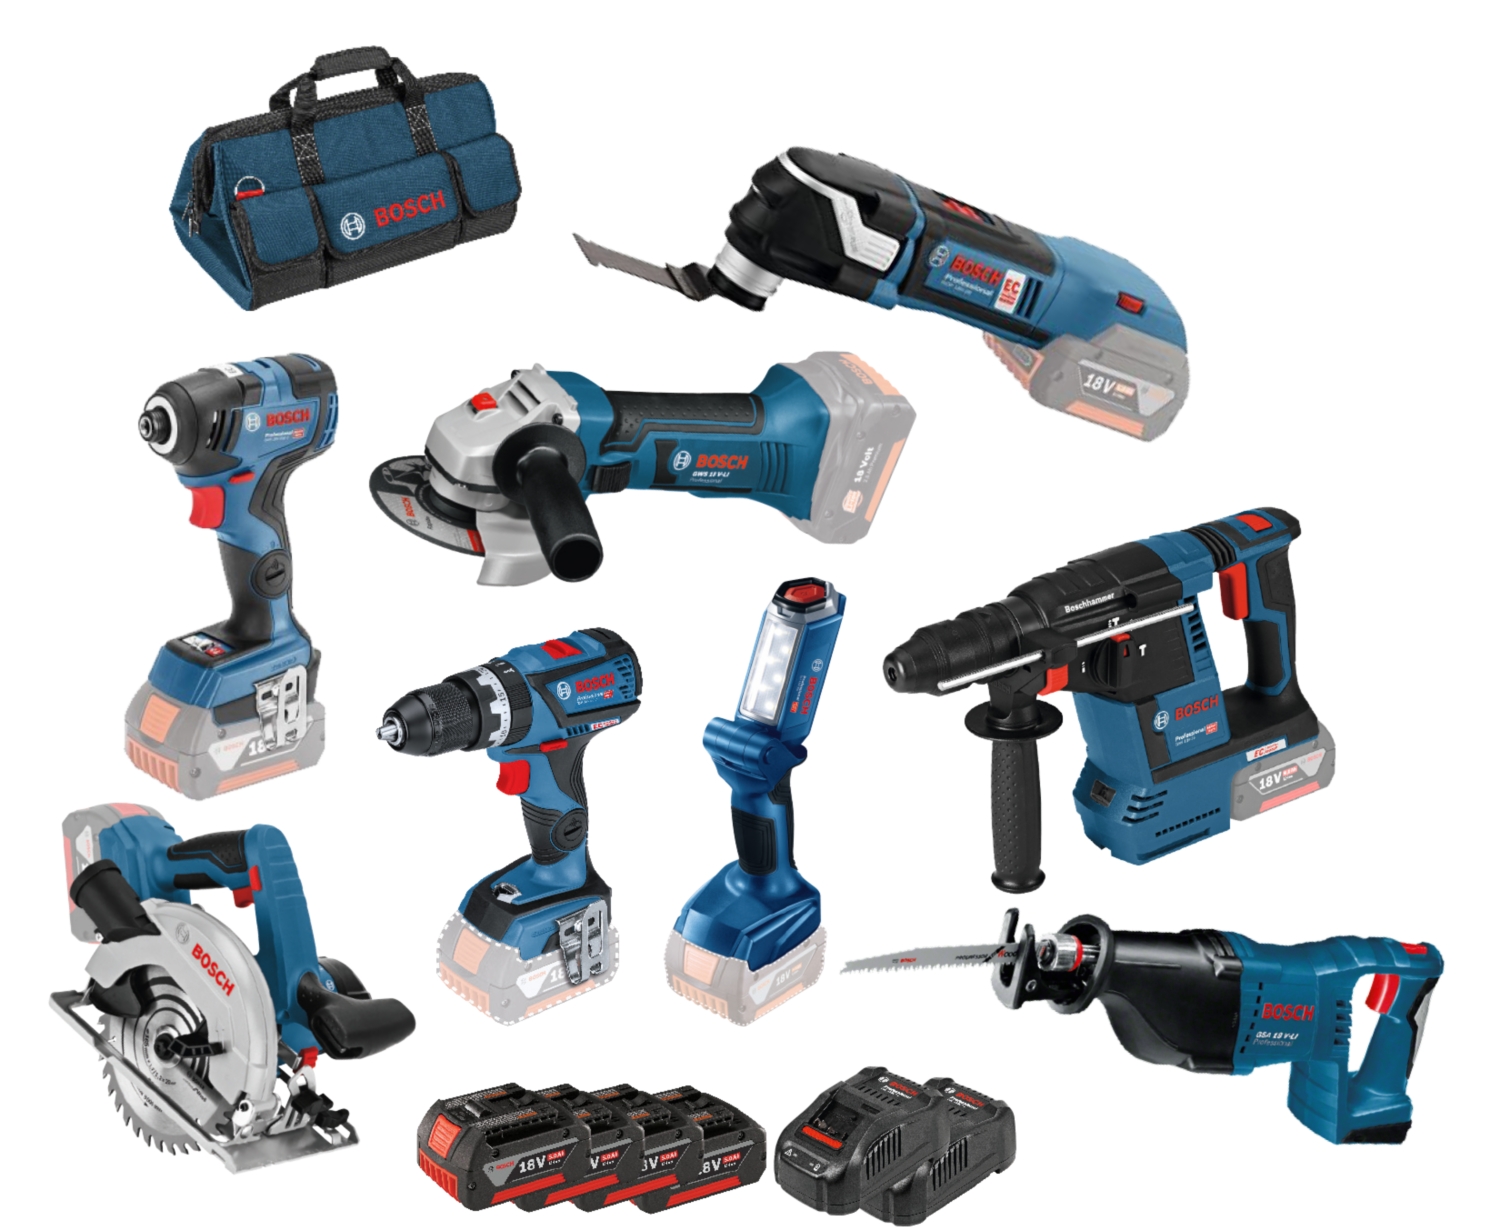 Kit 3 outils 18V Bosch Professional